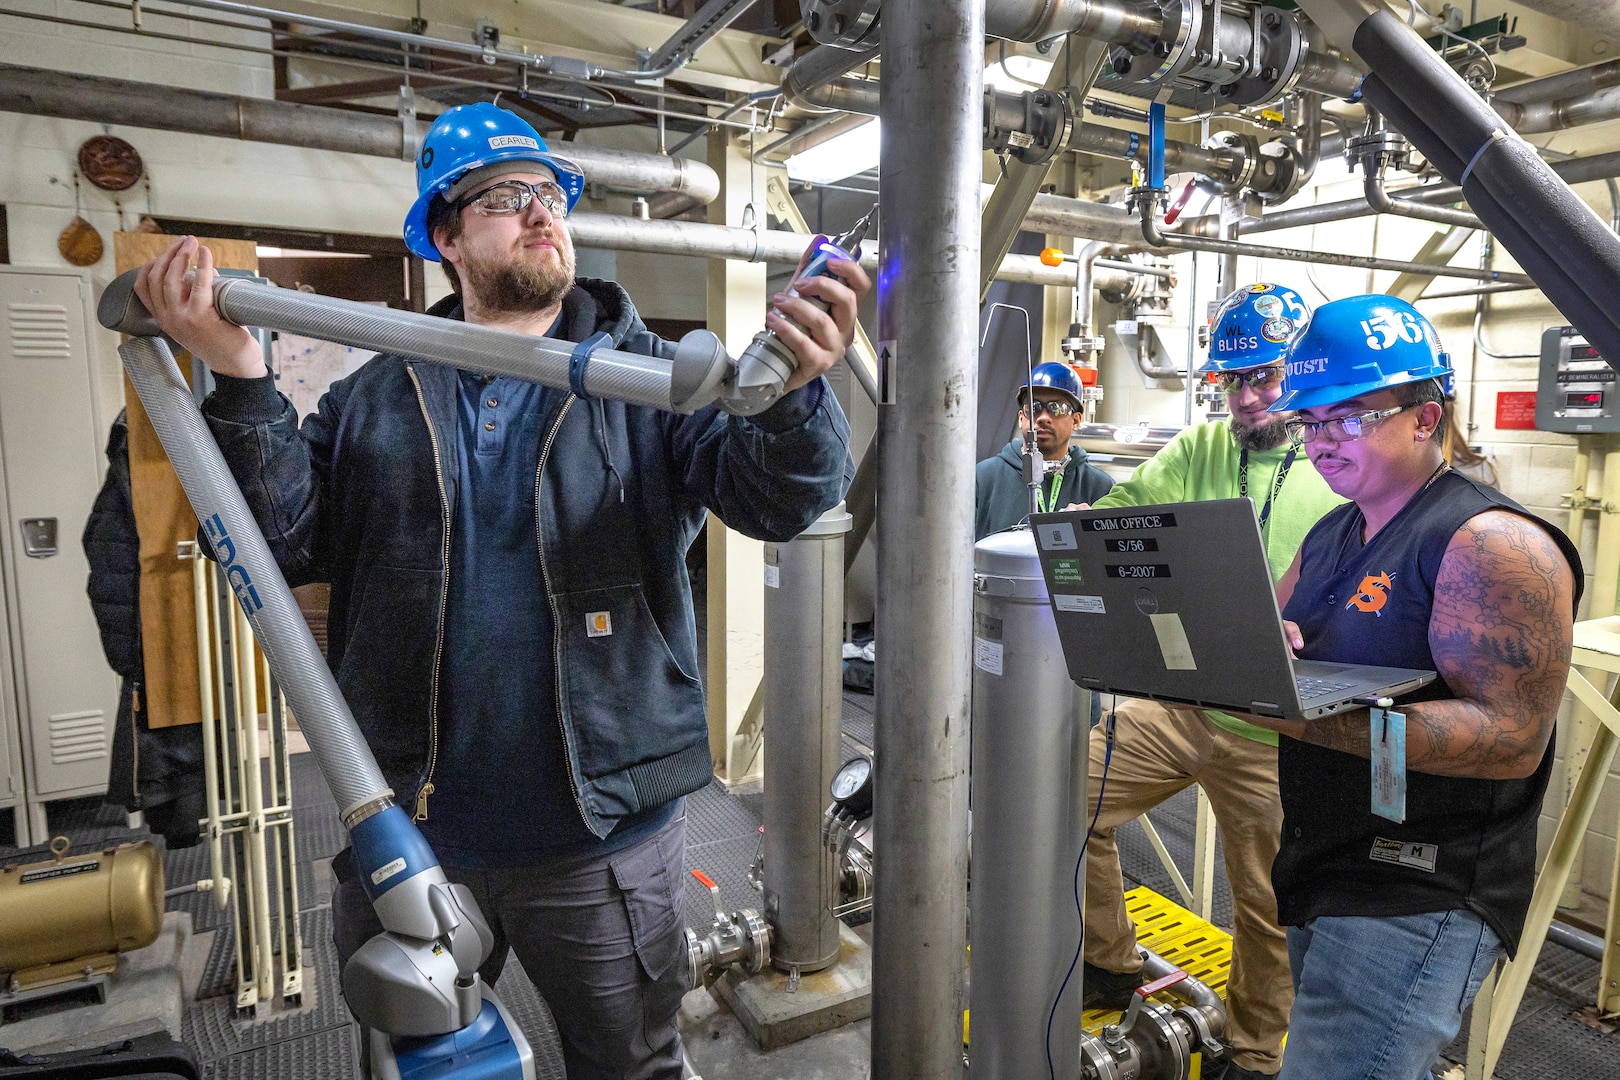 Shop 56 pipefitters (from left) Mitchell Clearly, Brandon Bliss and Chris Foust demonstrate the use of the new, portable FARO Arm at the NBK Pure Water Plant December 12, 2022 at Naval Base Kitsap-Bremerton, Washington. (U.S. Navy photo by Scott Hansen)